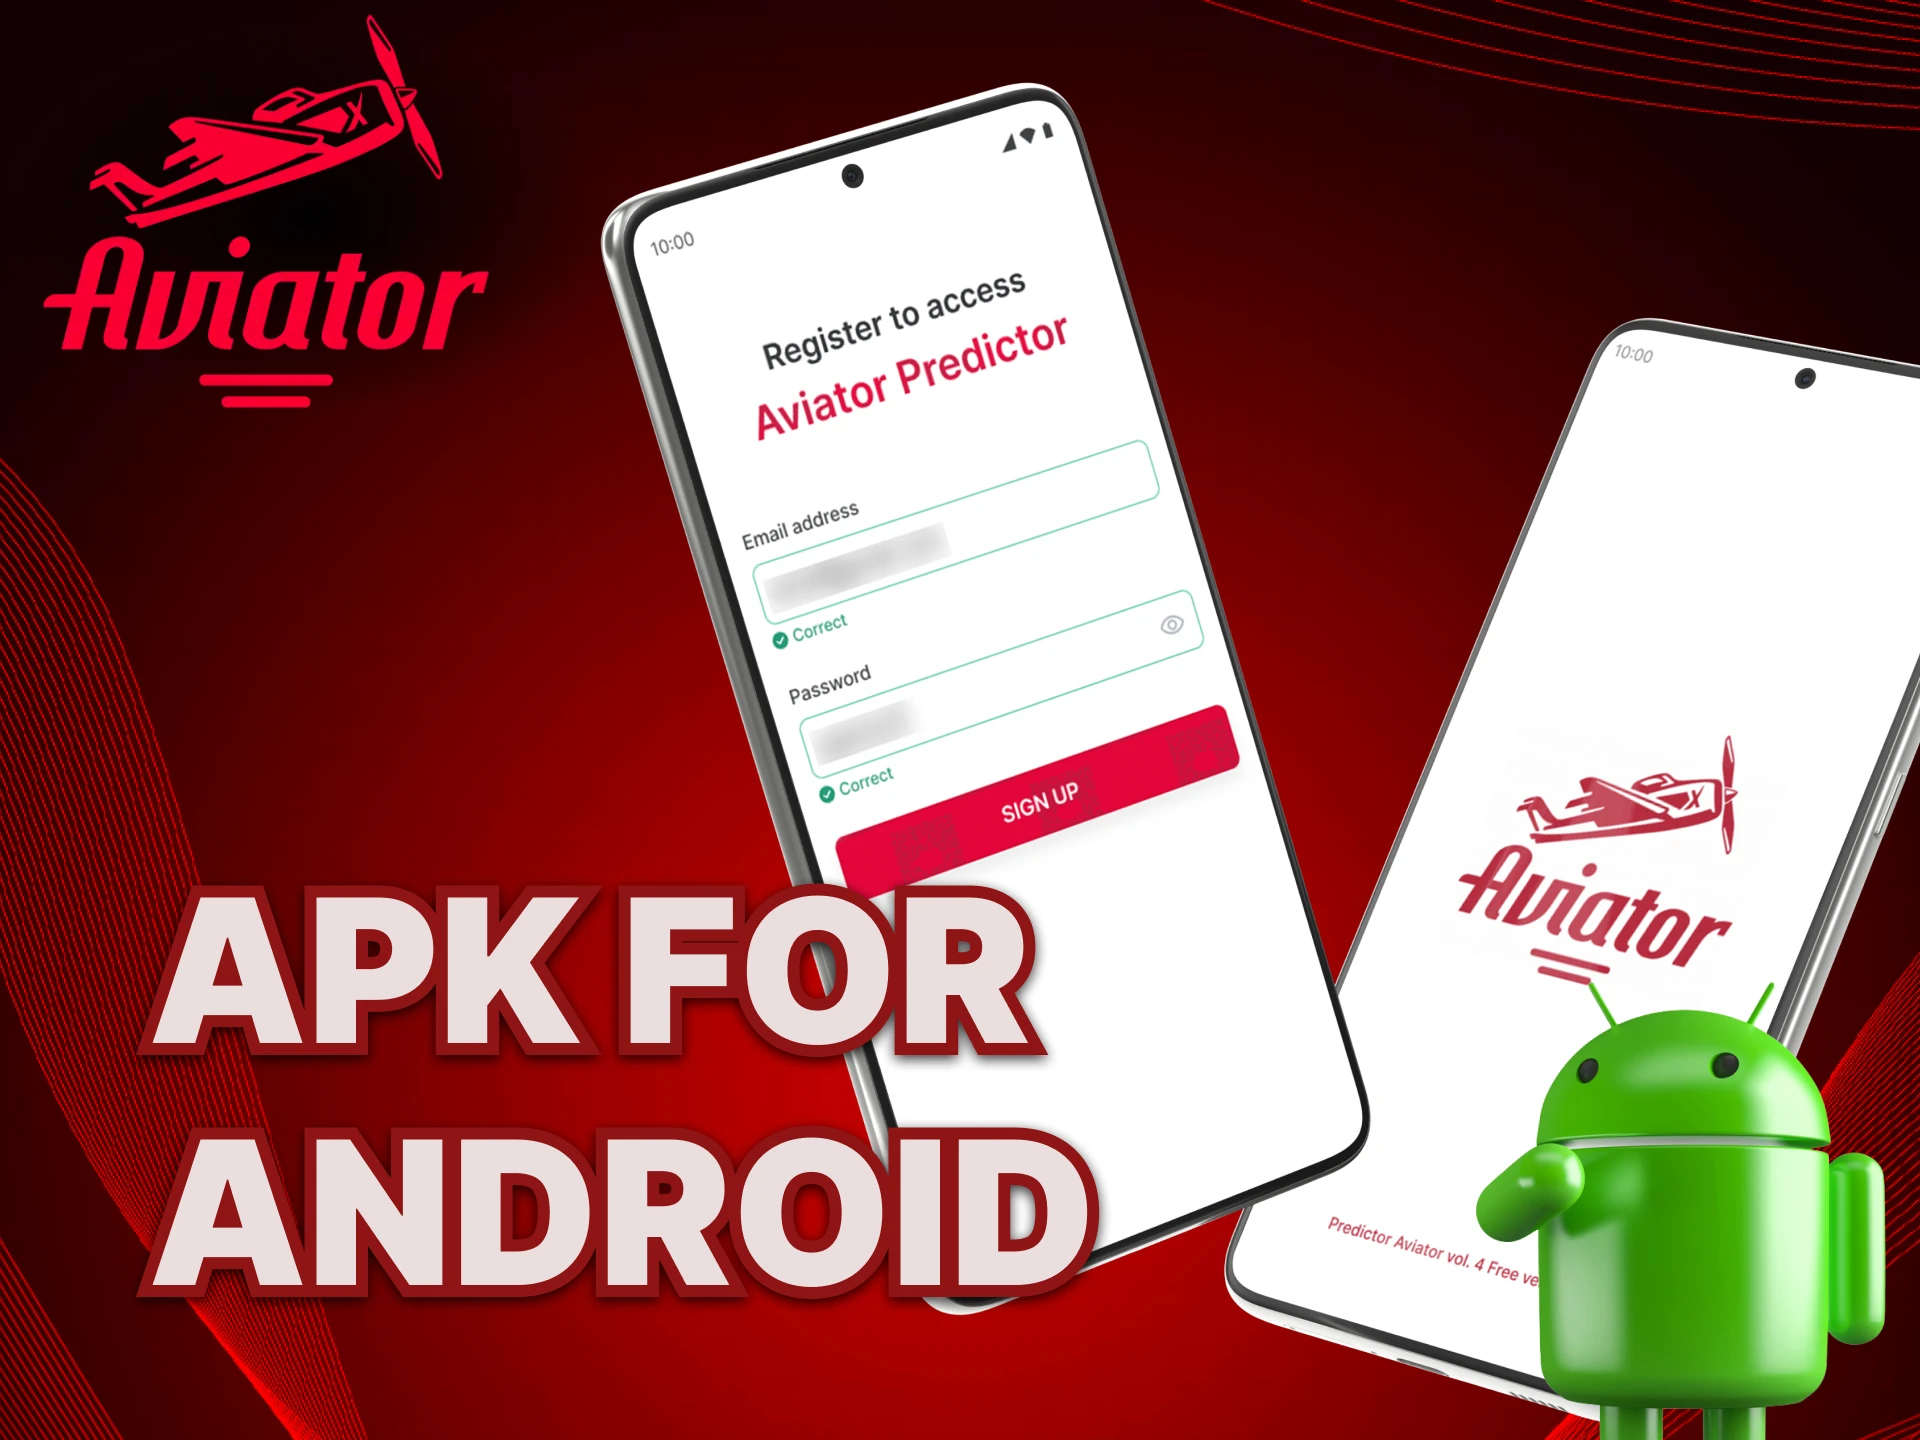 How to download the Aviator app on your Android phone.